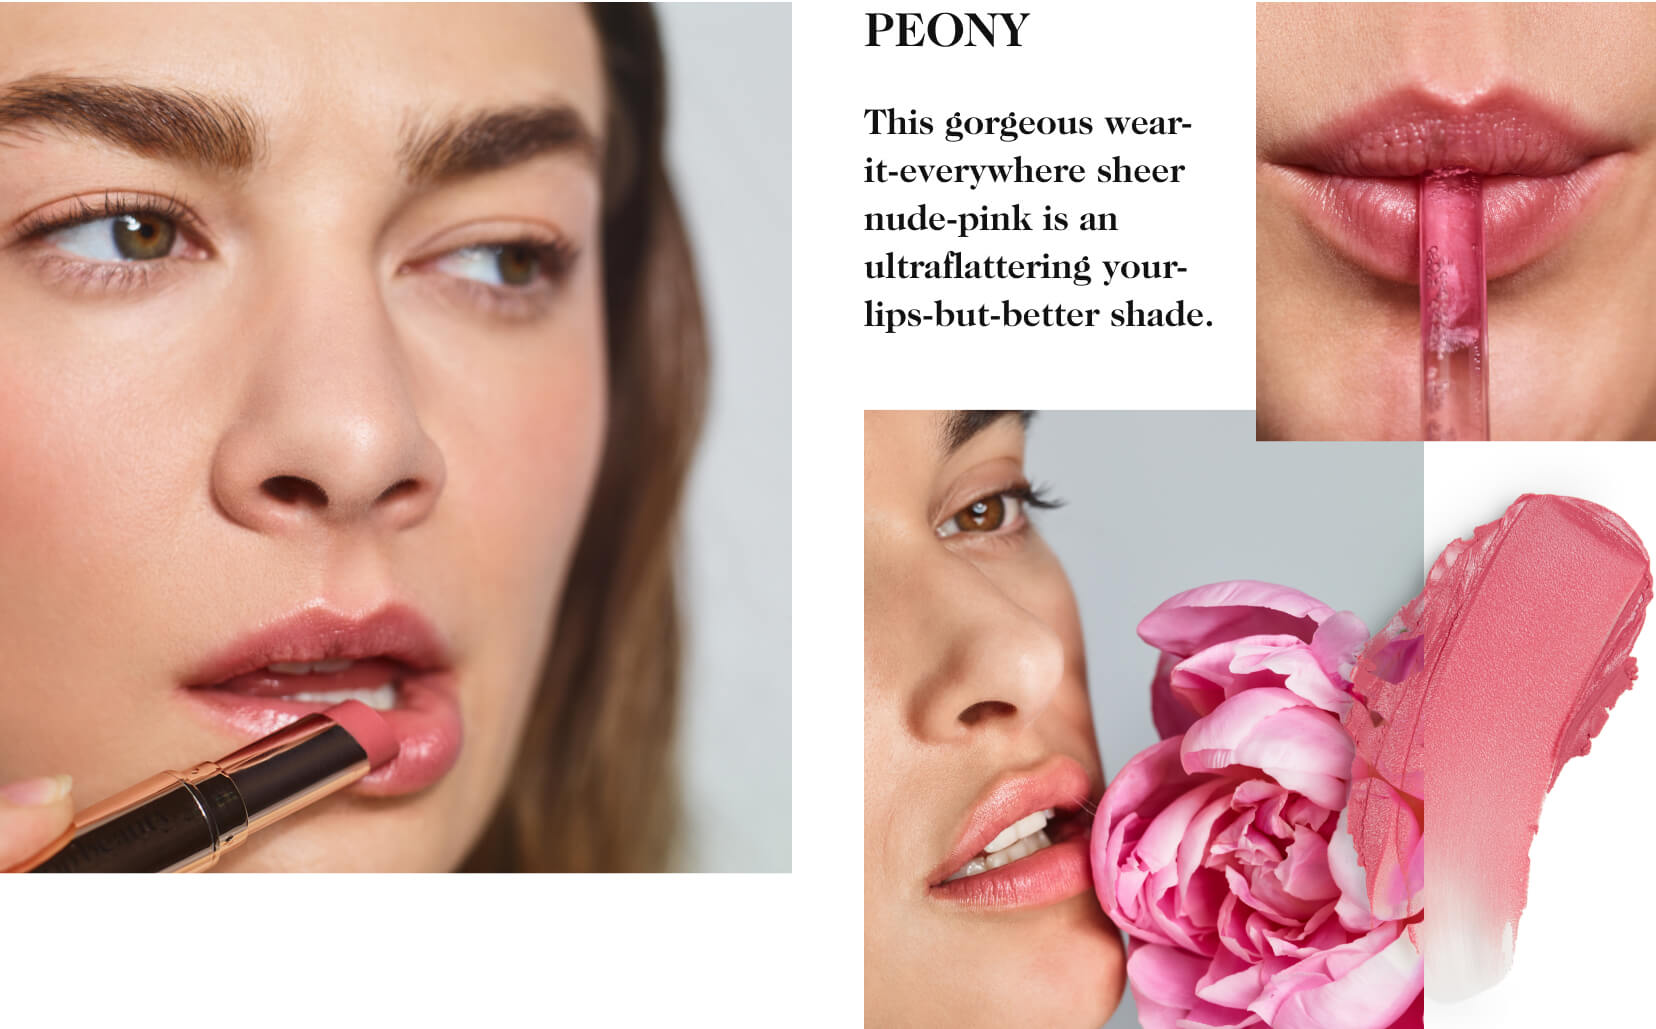 Peony - This gorgeous wear-it-everywhere sheer nude-pink is an ultraflattering your-lips-but-better shade.